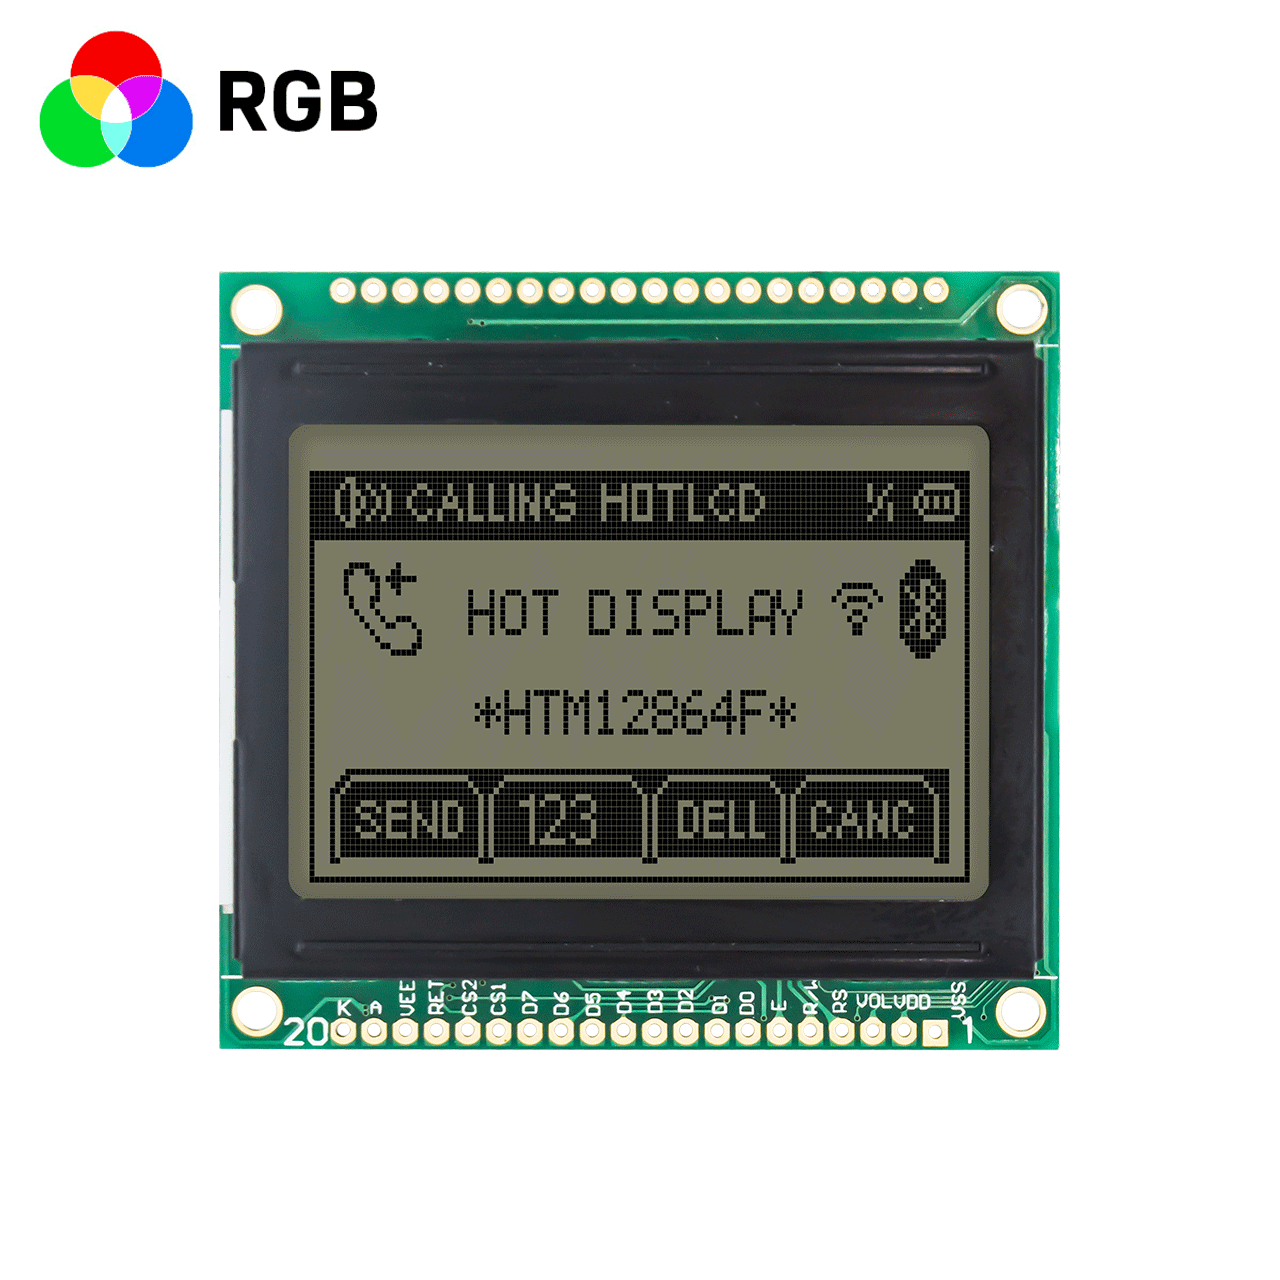 2" low cost 128X64 graphic LCD module | 12864 graphic LCD display | FSTN positive display | RGB red, green and blue | Adruino